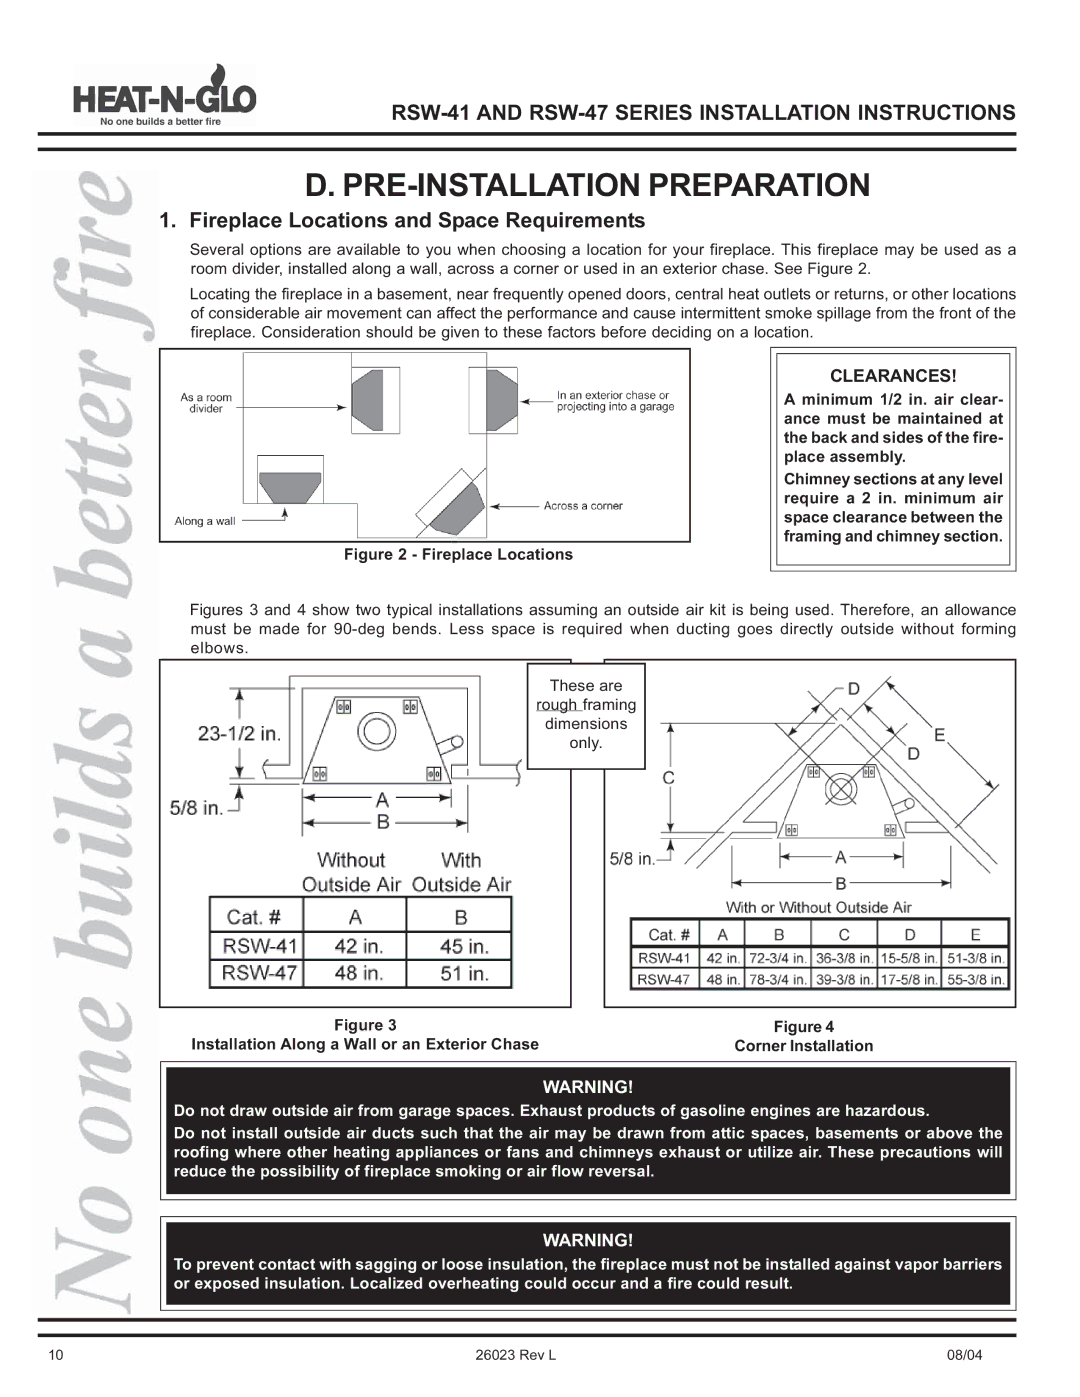 Hearth and Home Technologies RSW-41, RSW-47 manual PRE-INSTALLATION Preparation, Fireplace Locations and Space Requirements 